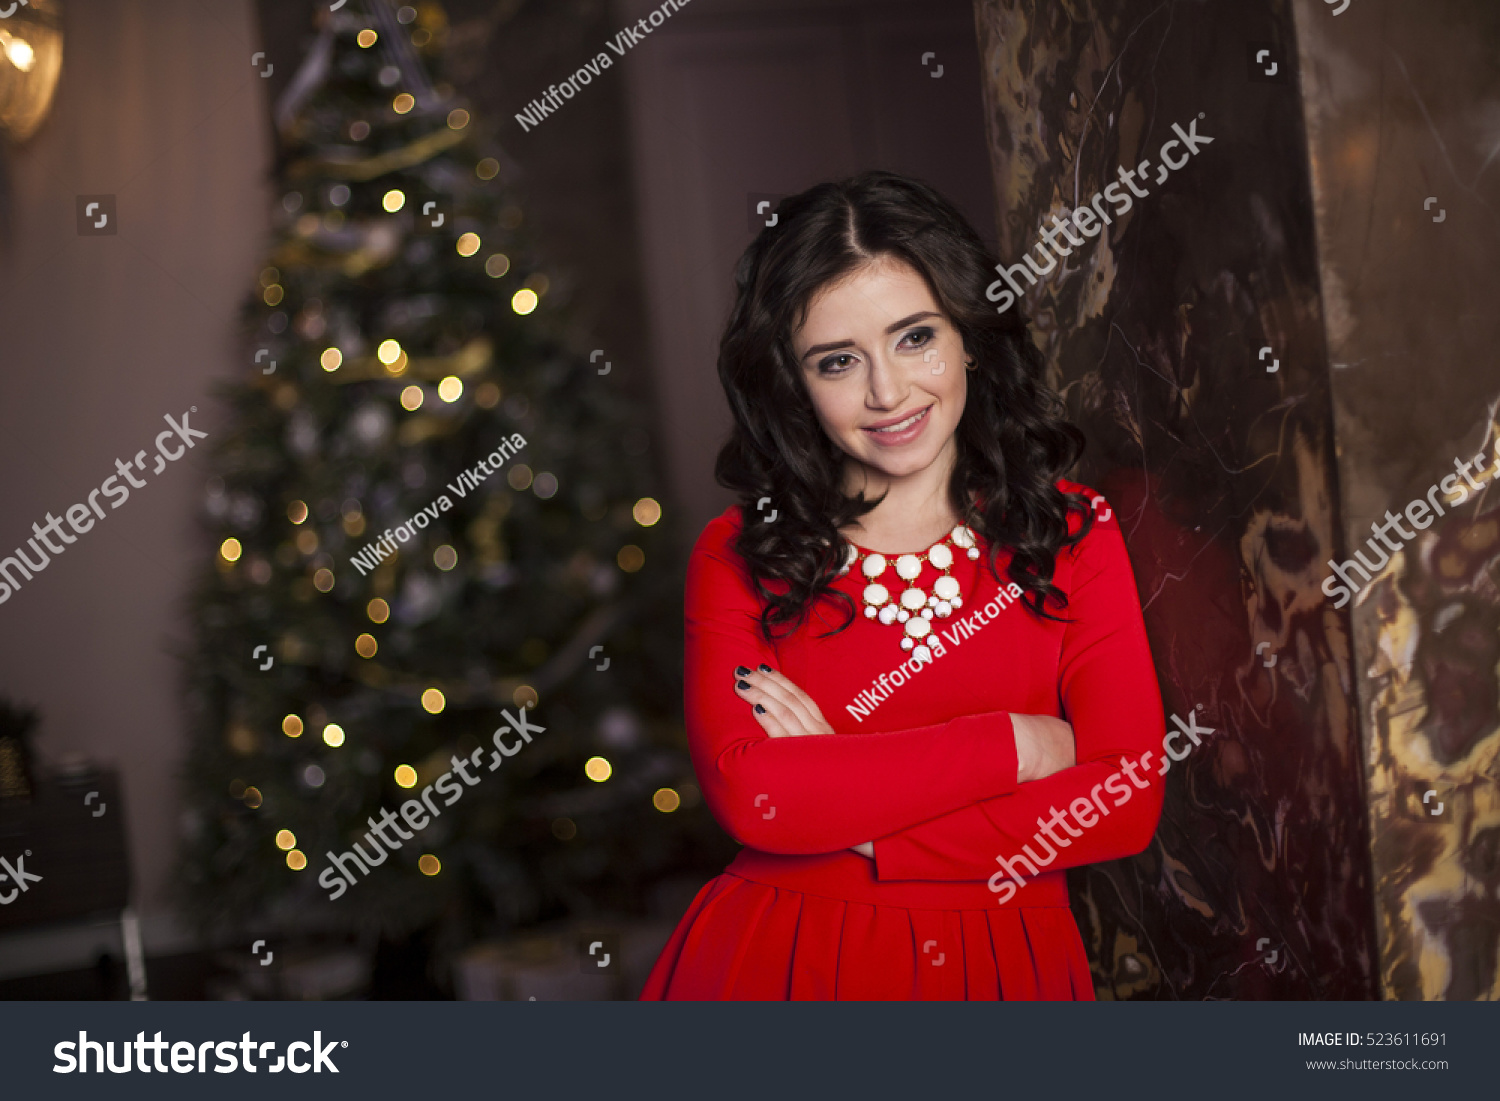 Cute girl in red dress with Christmas tree #523611691